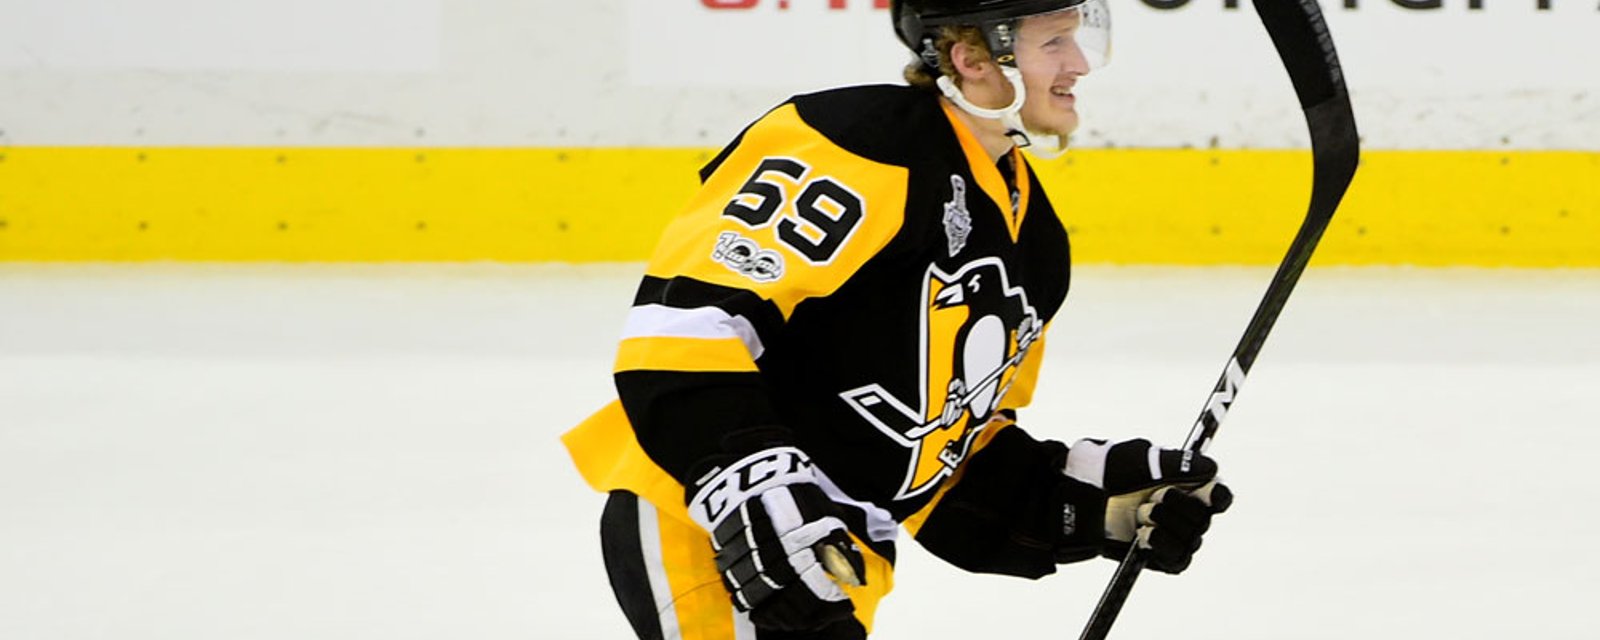 Must see: Jake Guentzel, the most intriguing player to watch this season 